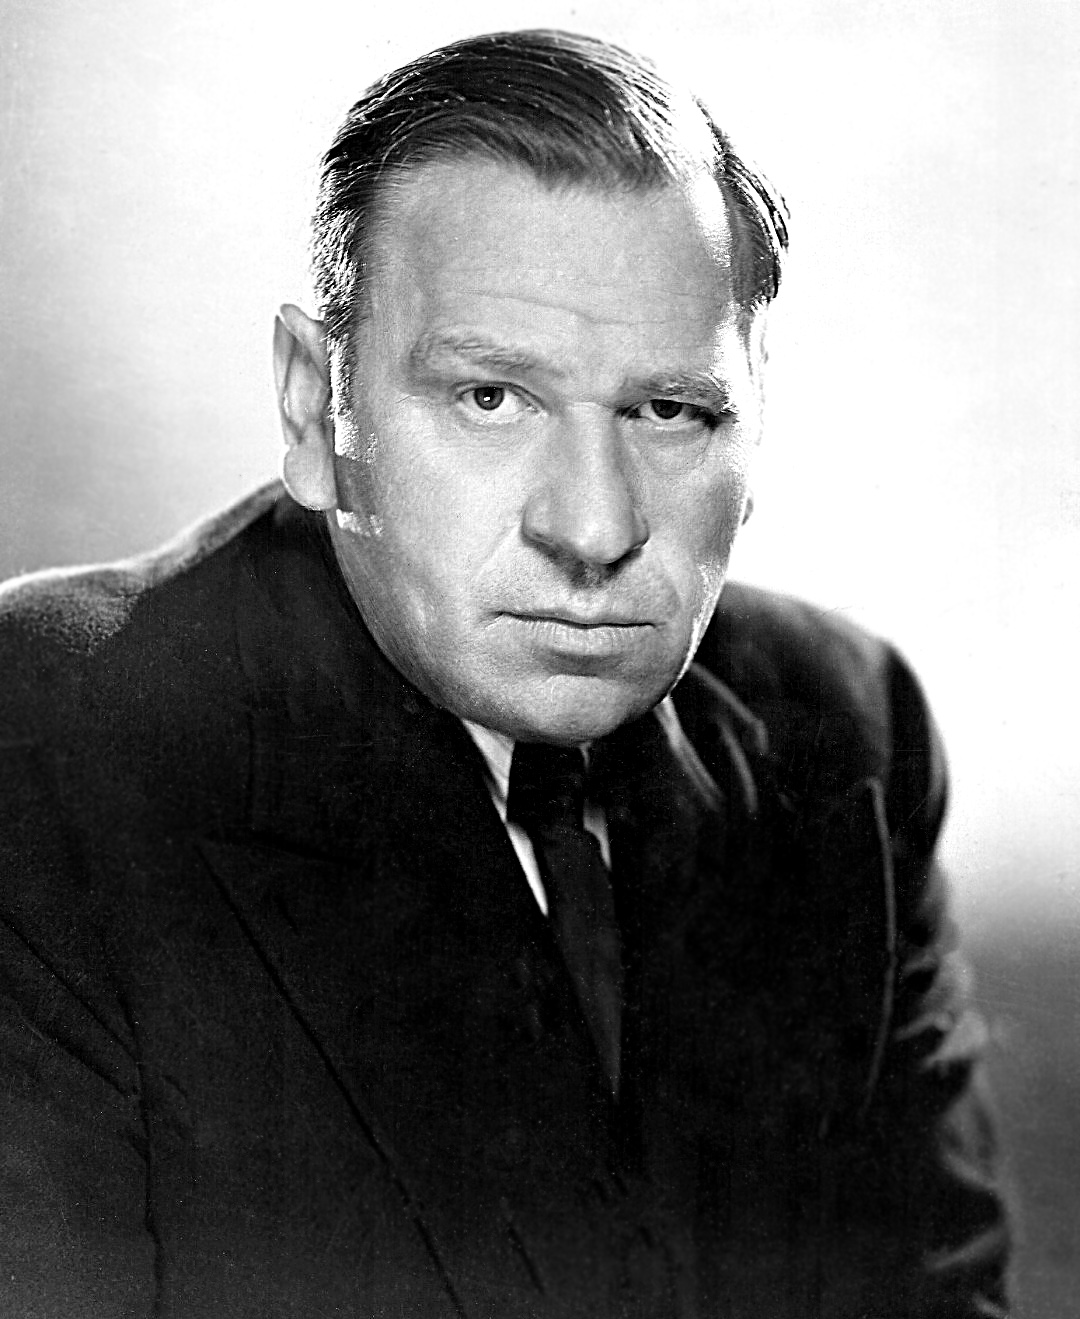 How tall is Wallace Beery?